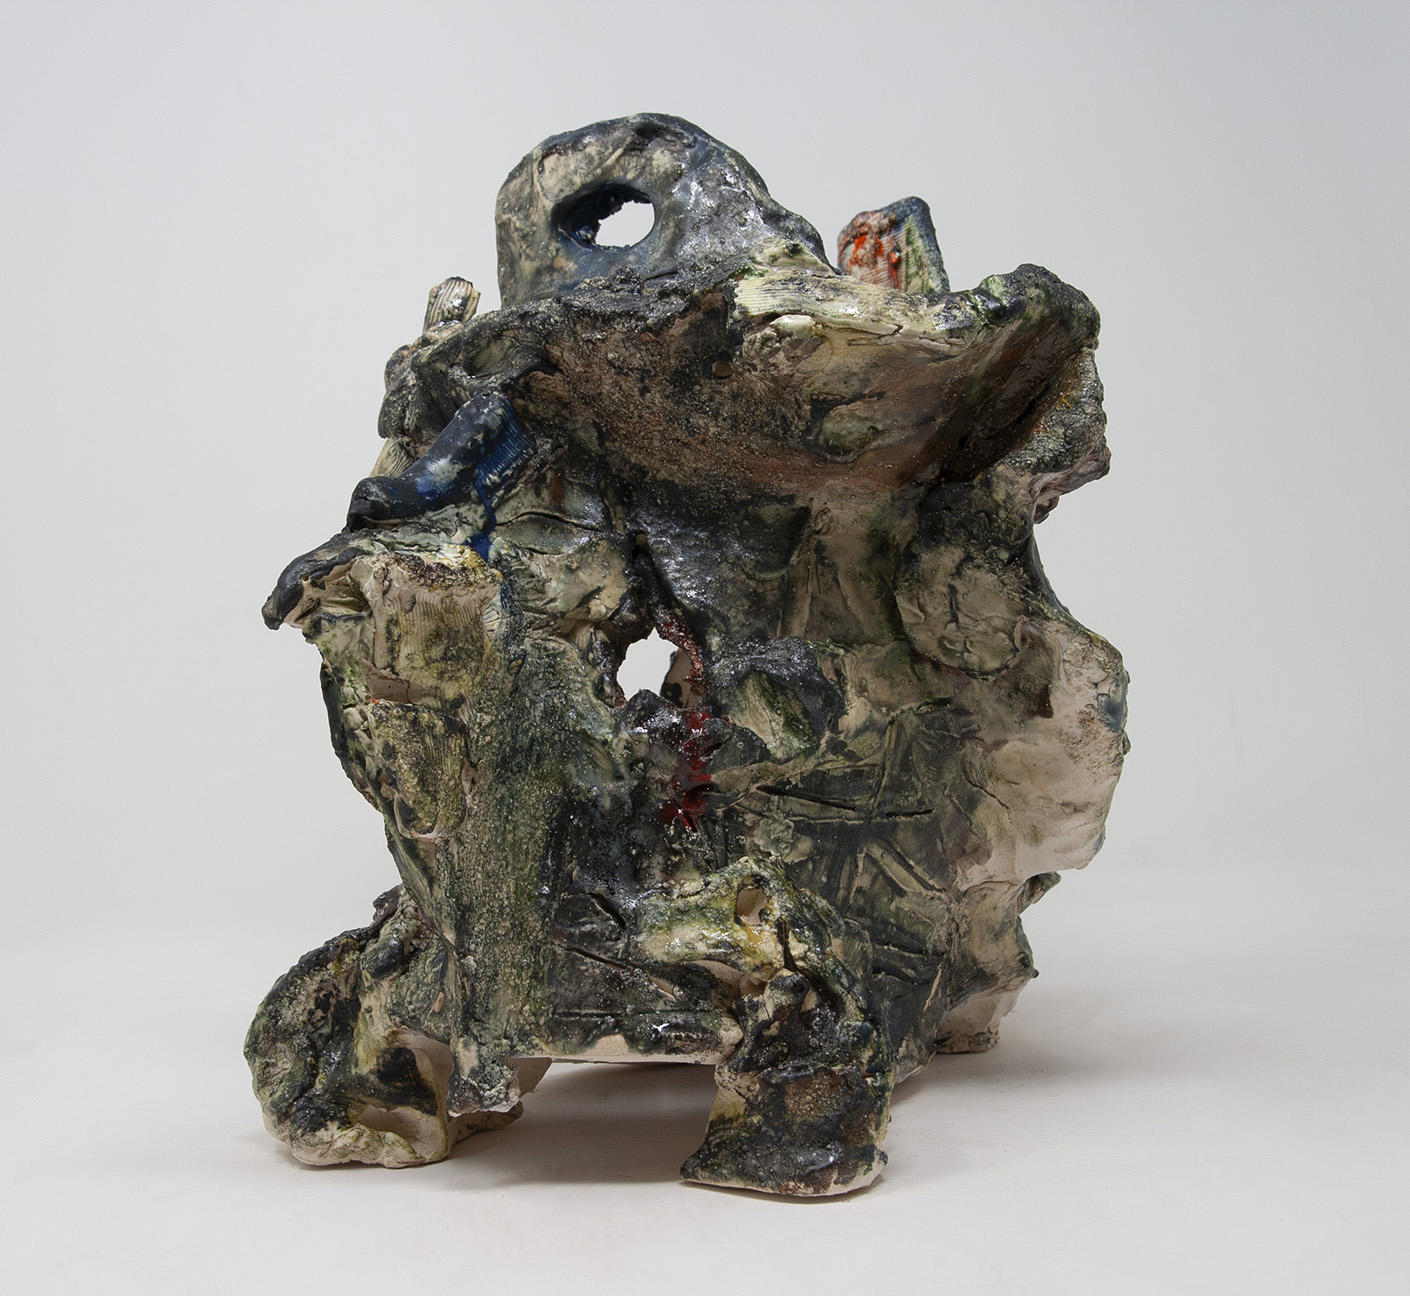 Ceramic object in the shape of a broken helmet with textural glaze